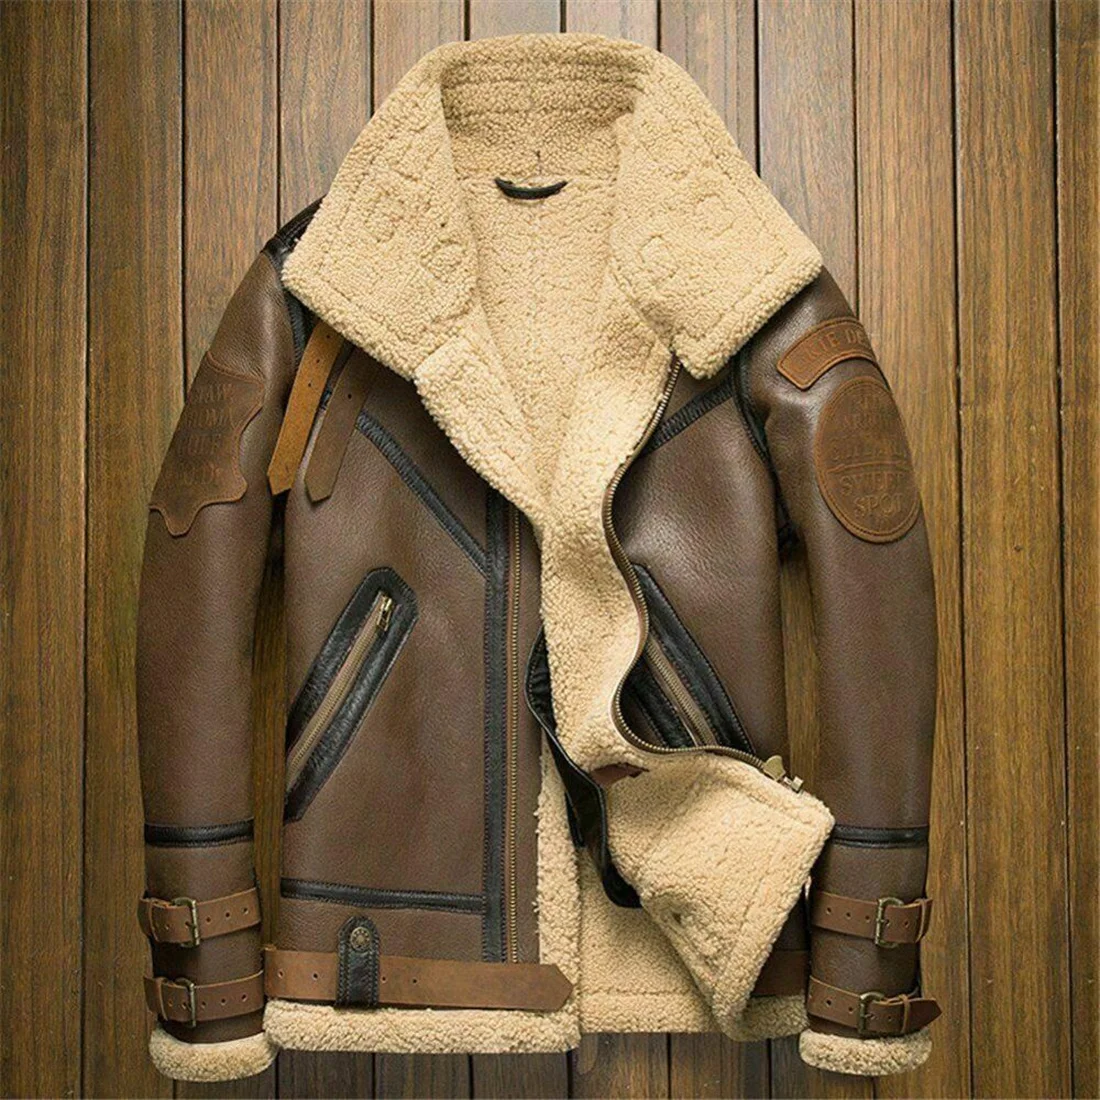 New Customized Men's Real Fur Sheepskin Raf B3 Bomber Flying Jacket New Custom Men's Bomber Jacket Lightweight Winter Faux Fur Lined Pilot Jacket With Stand Collar,Men's Faux Leather